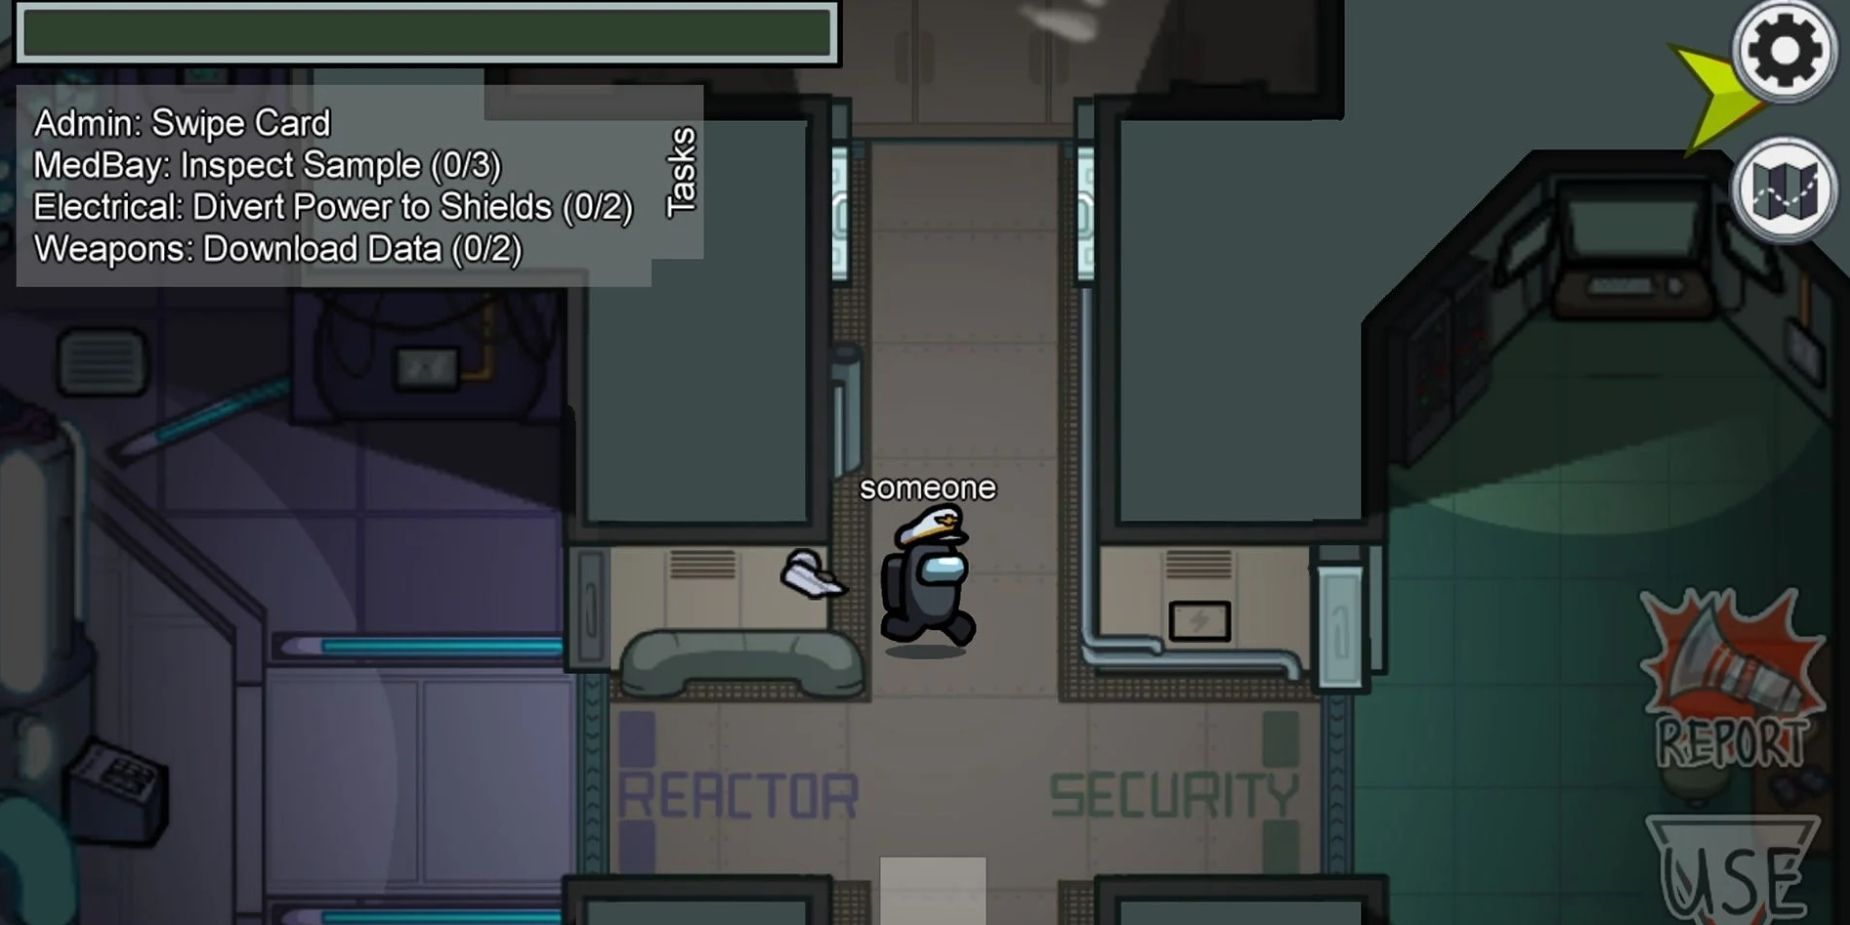 A crewmate walking past the security and reactor rooms in Among Us